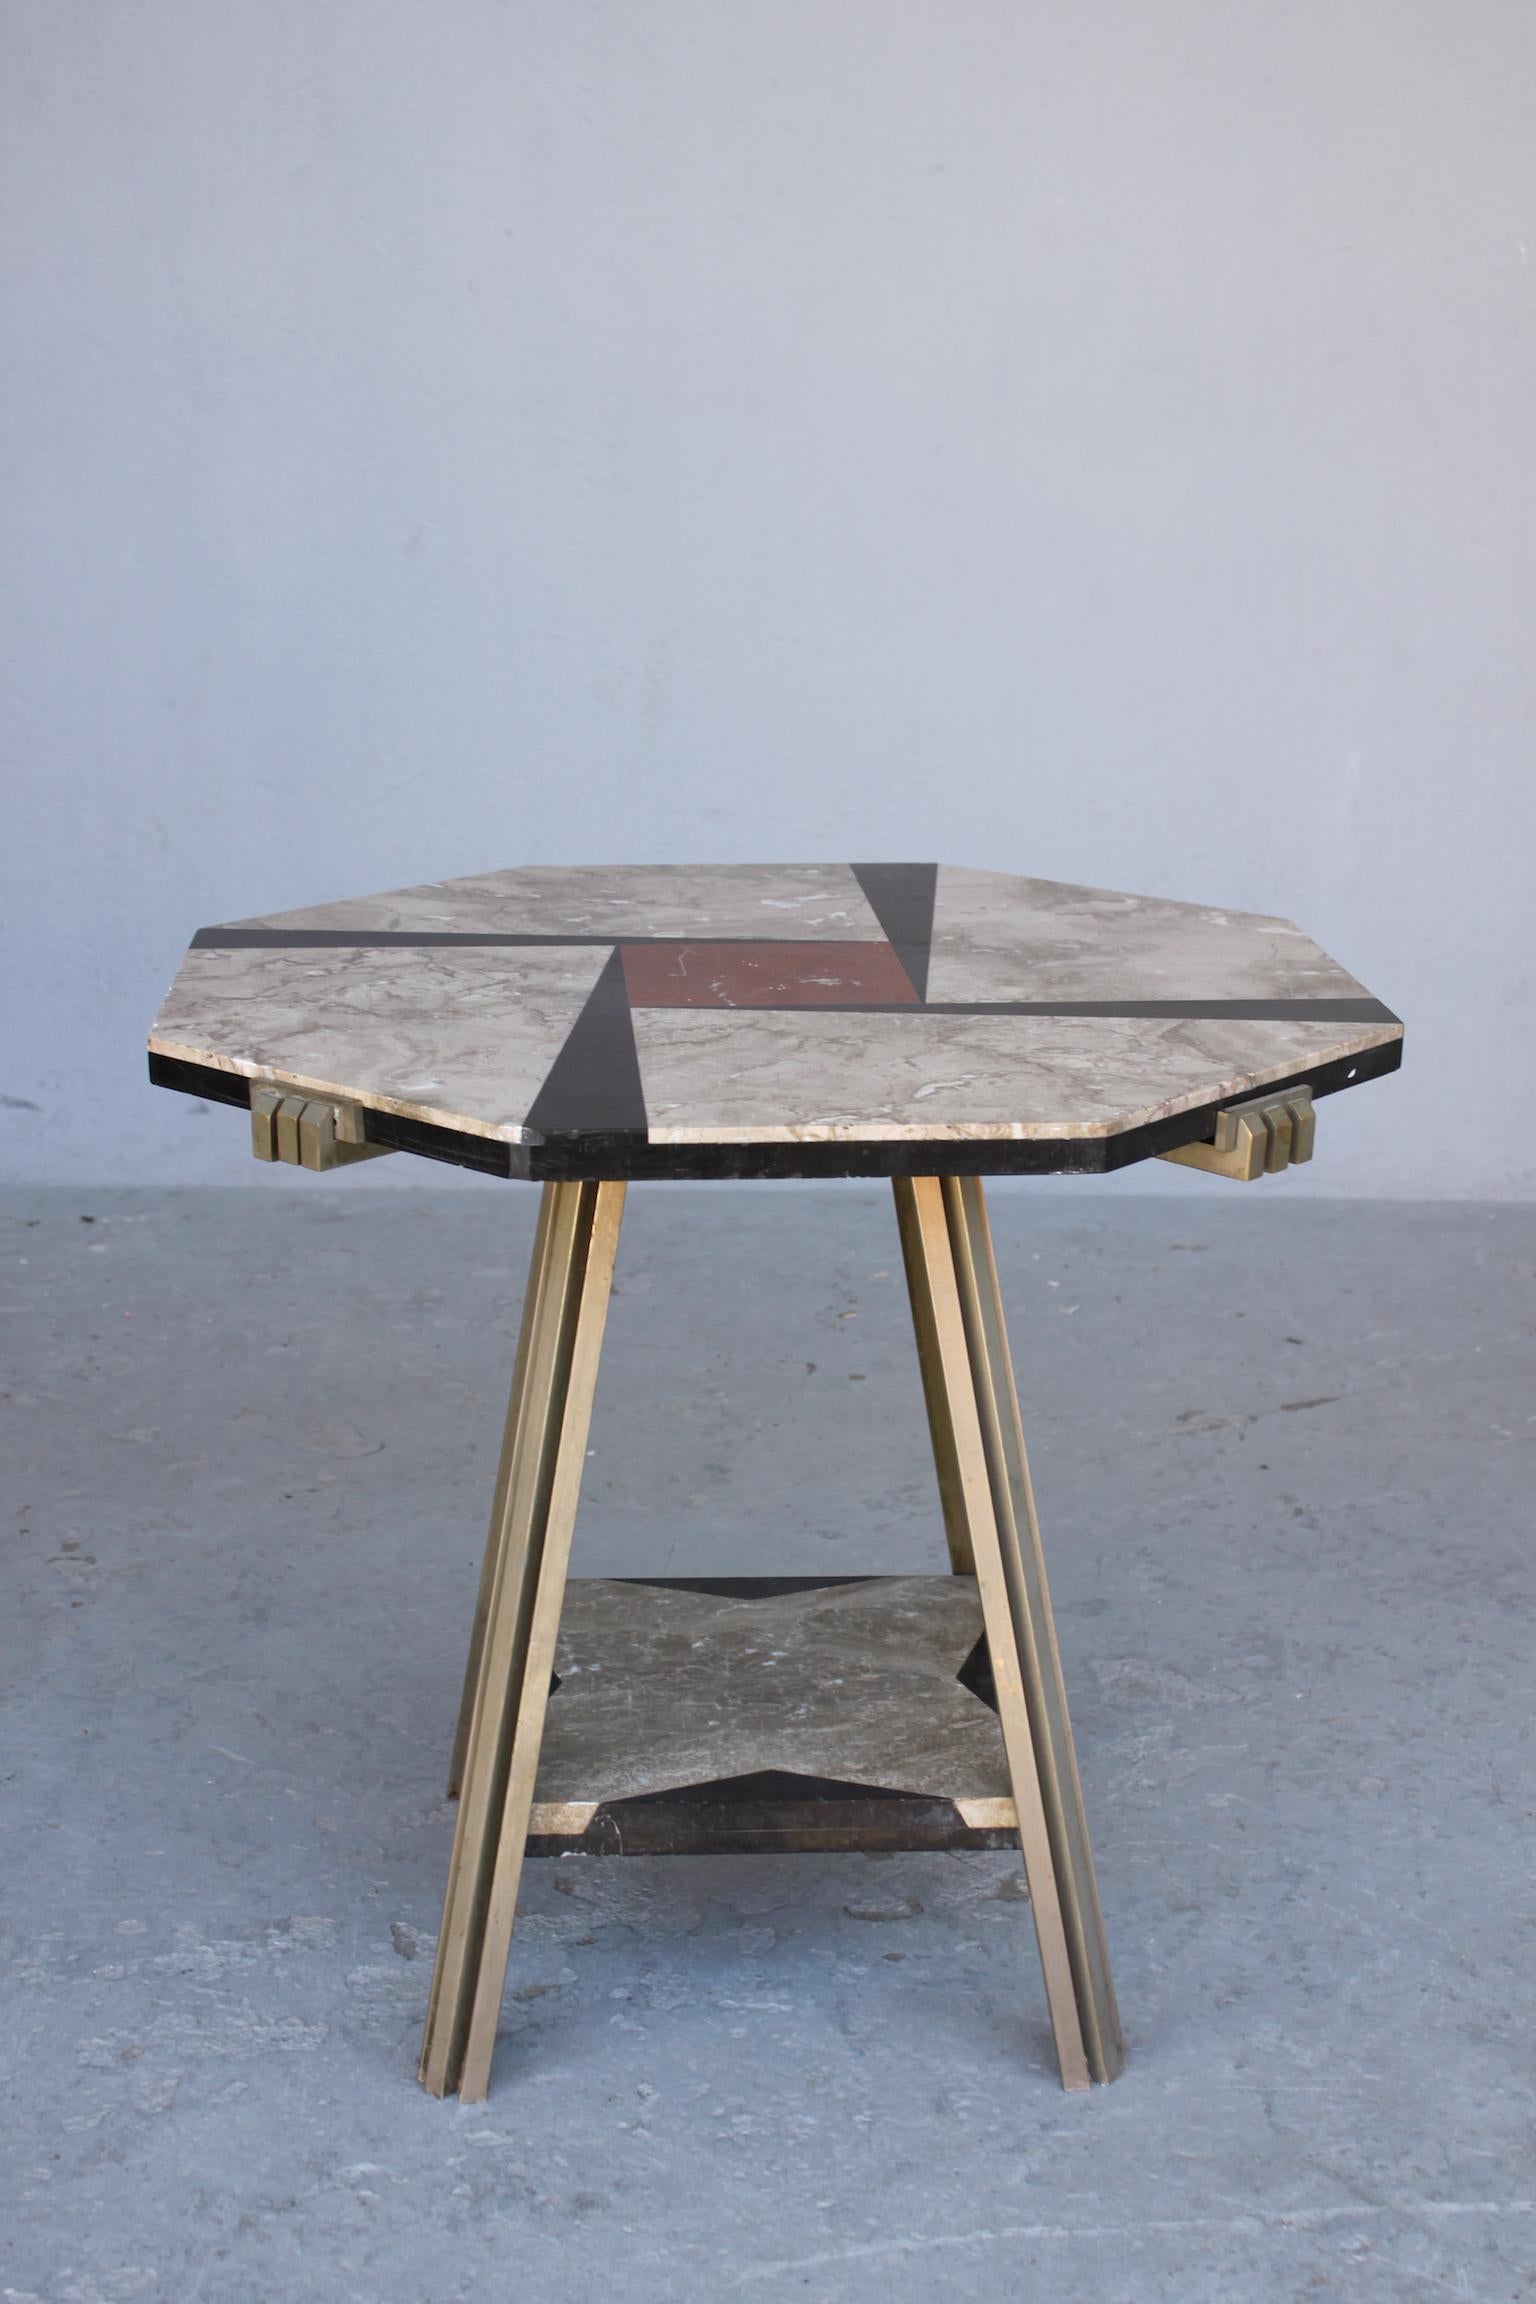 Art Deco modernist table made of metal and marble marquetry.
Dimensions: Diameter 64 cm, height 58 cm.
small tray: 30cm / 30cm.